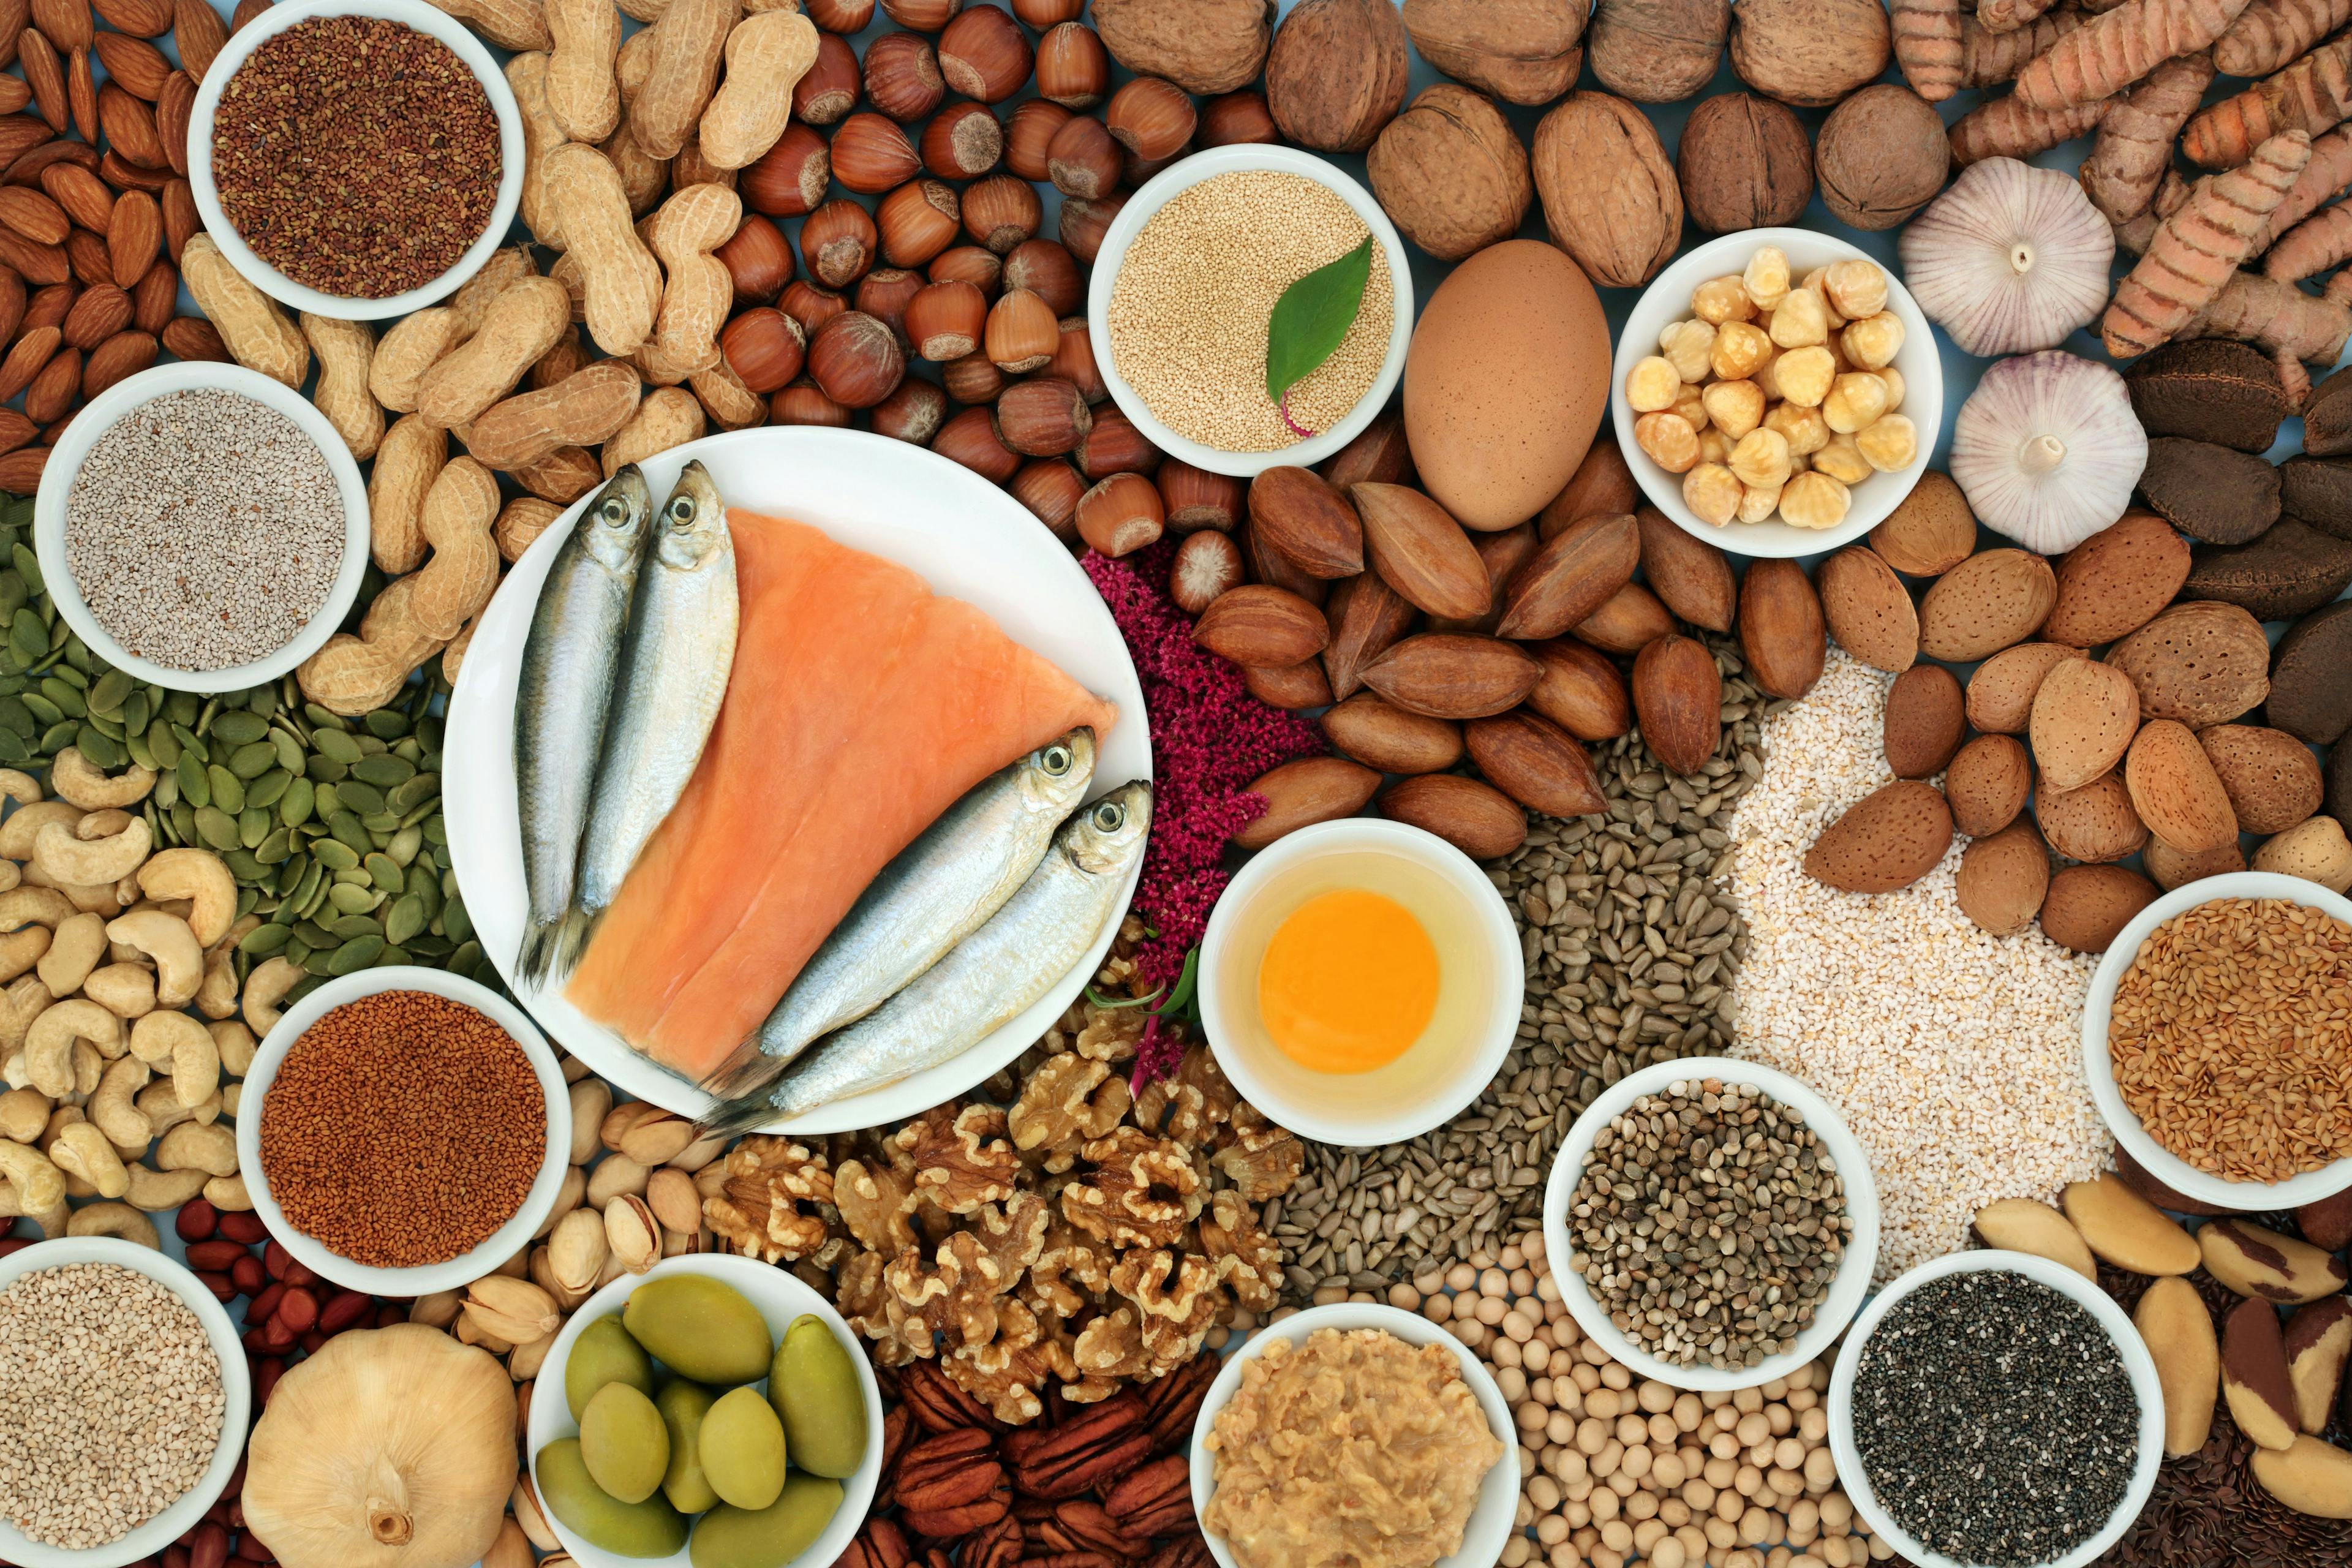 Healthy heart food ingredients high in lipids containing unsaturated good fats for low cholesterol levels with nuts, seeds, dairy, fish, vegetables, legumes and grain. Top view. | Image Credit: © marilyn barbone